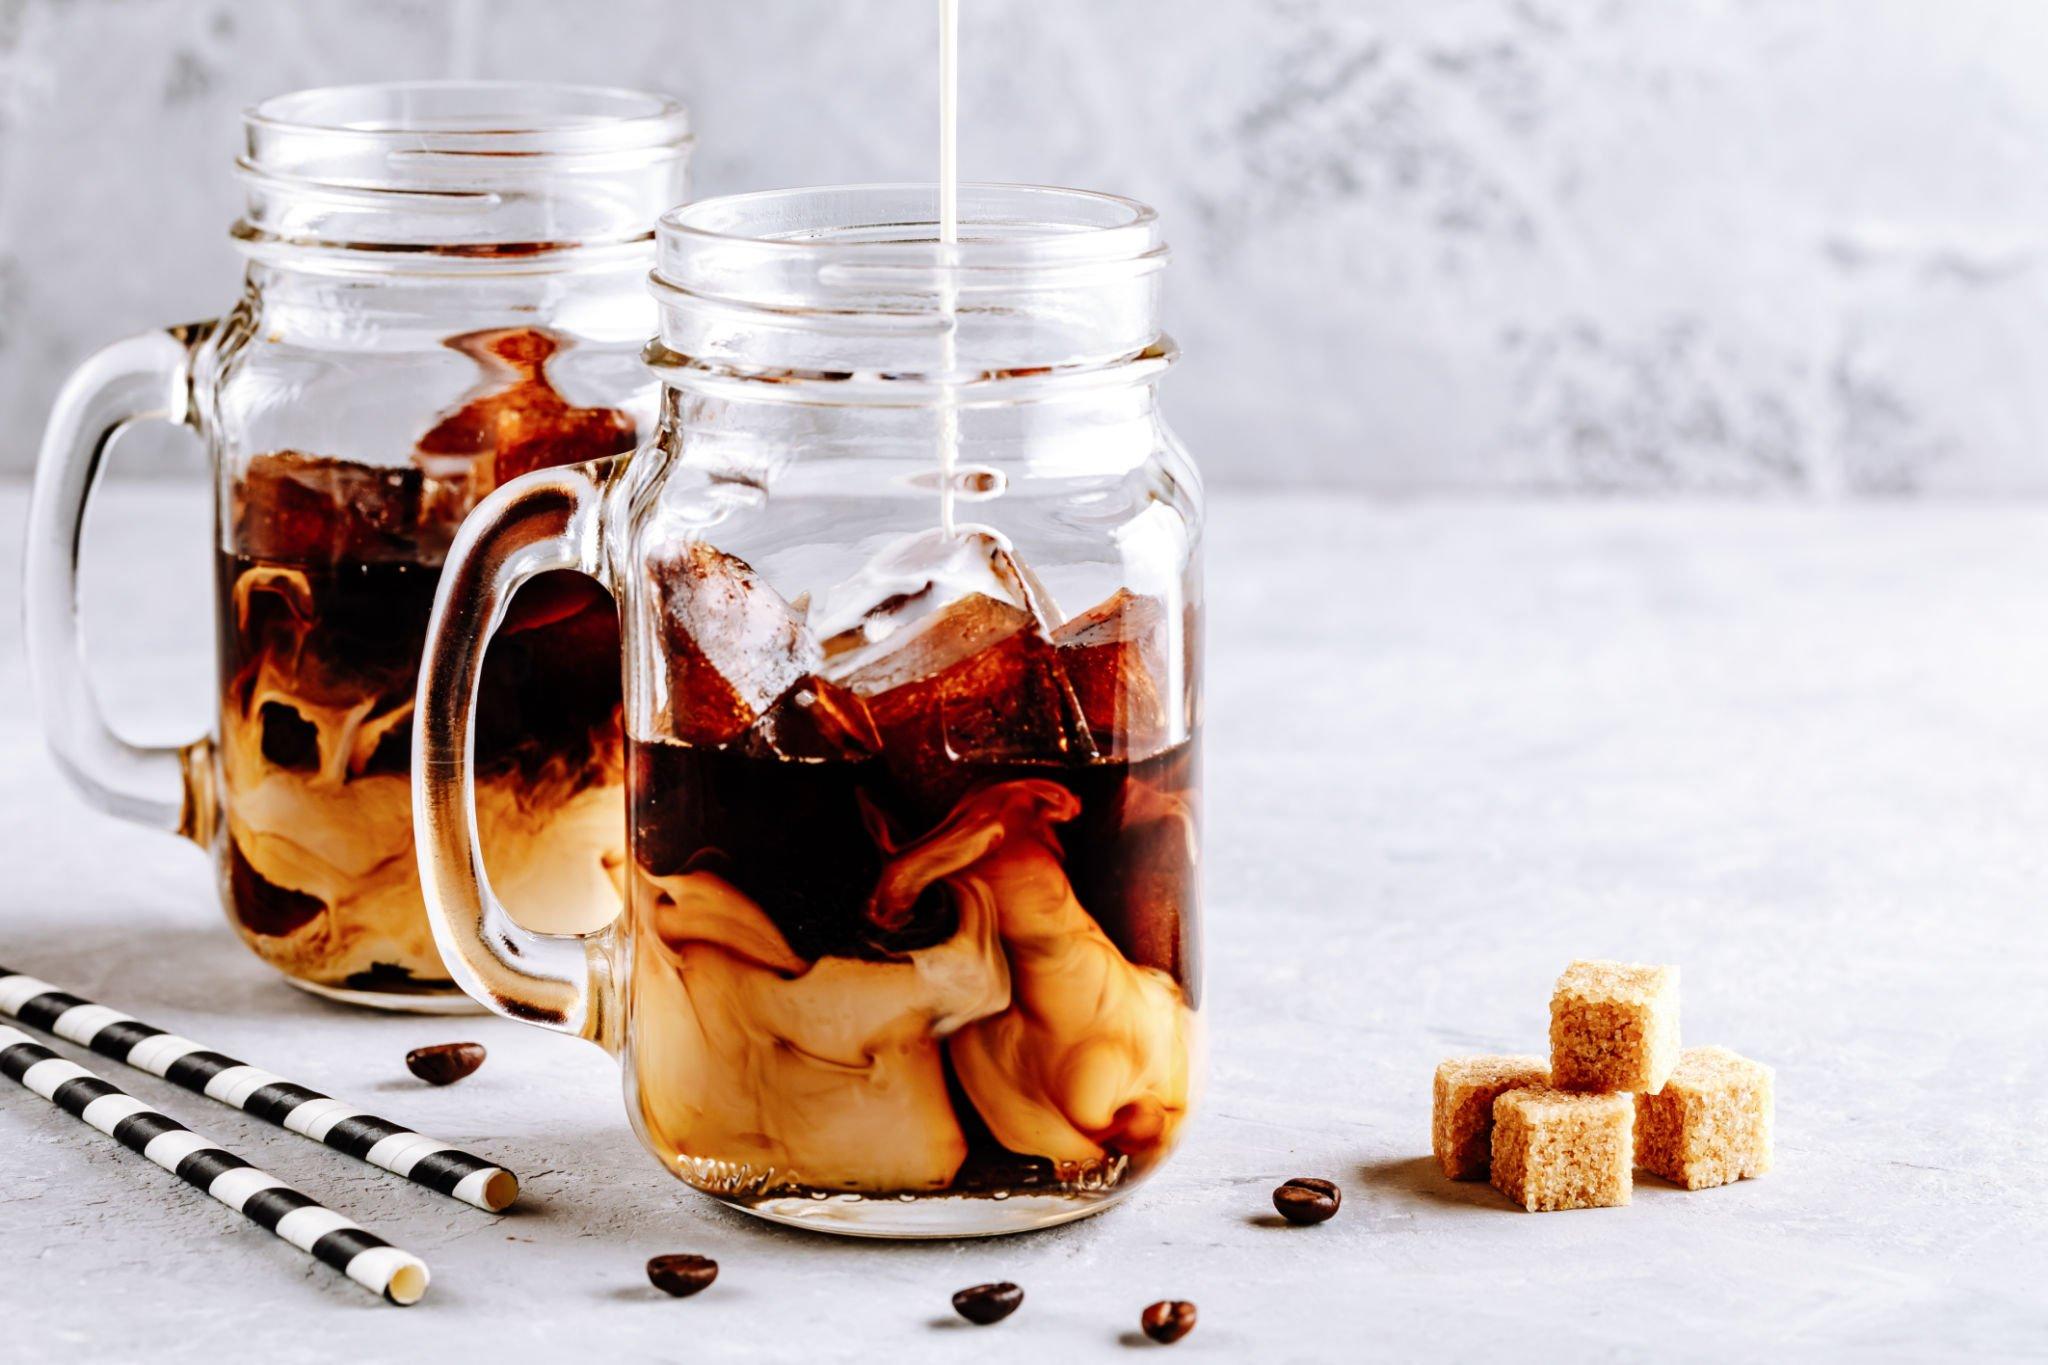 Which is better for you: Iced Latte or Iced Coffee?